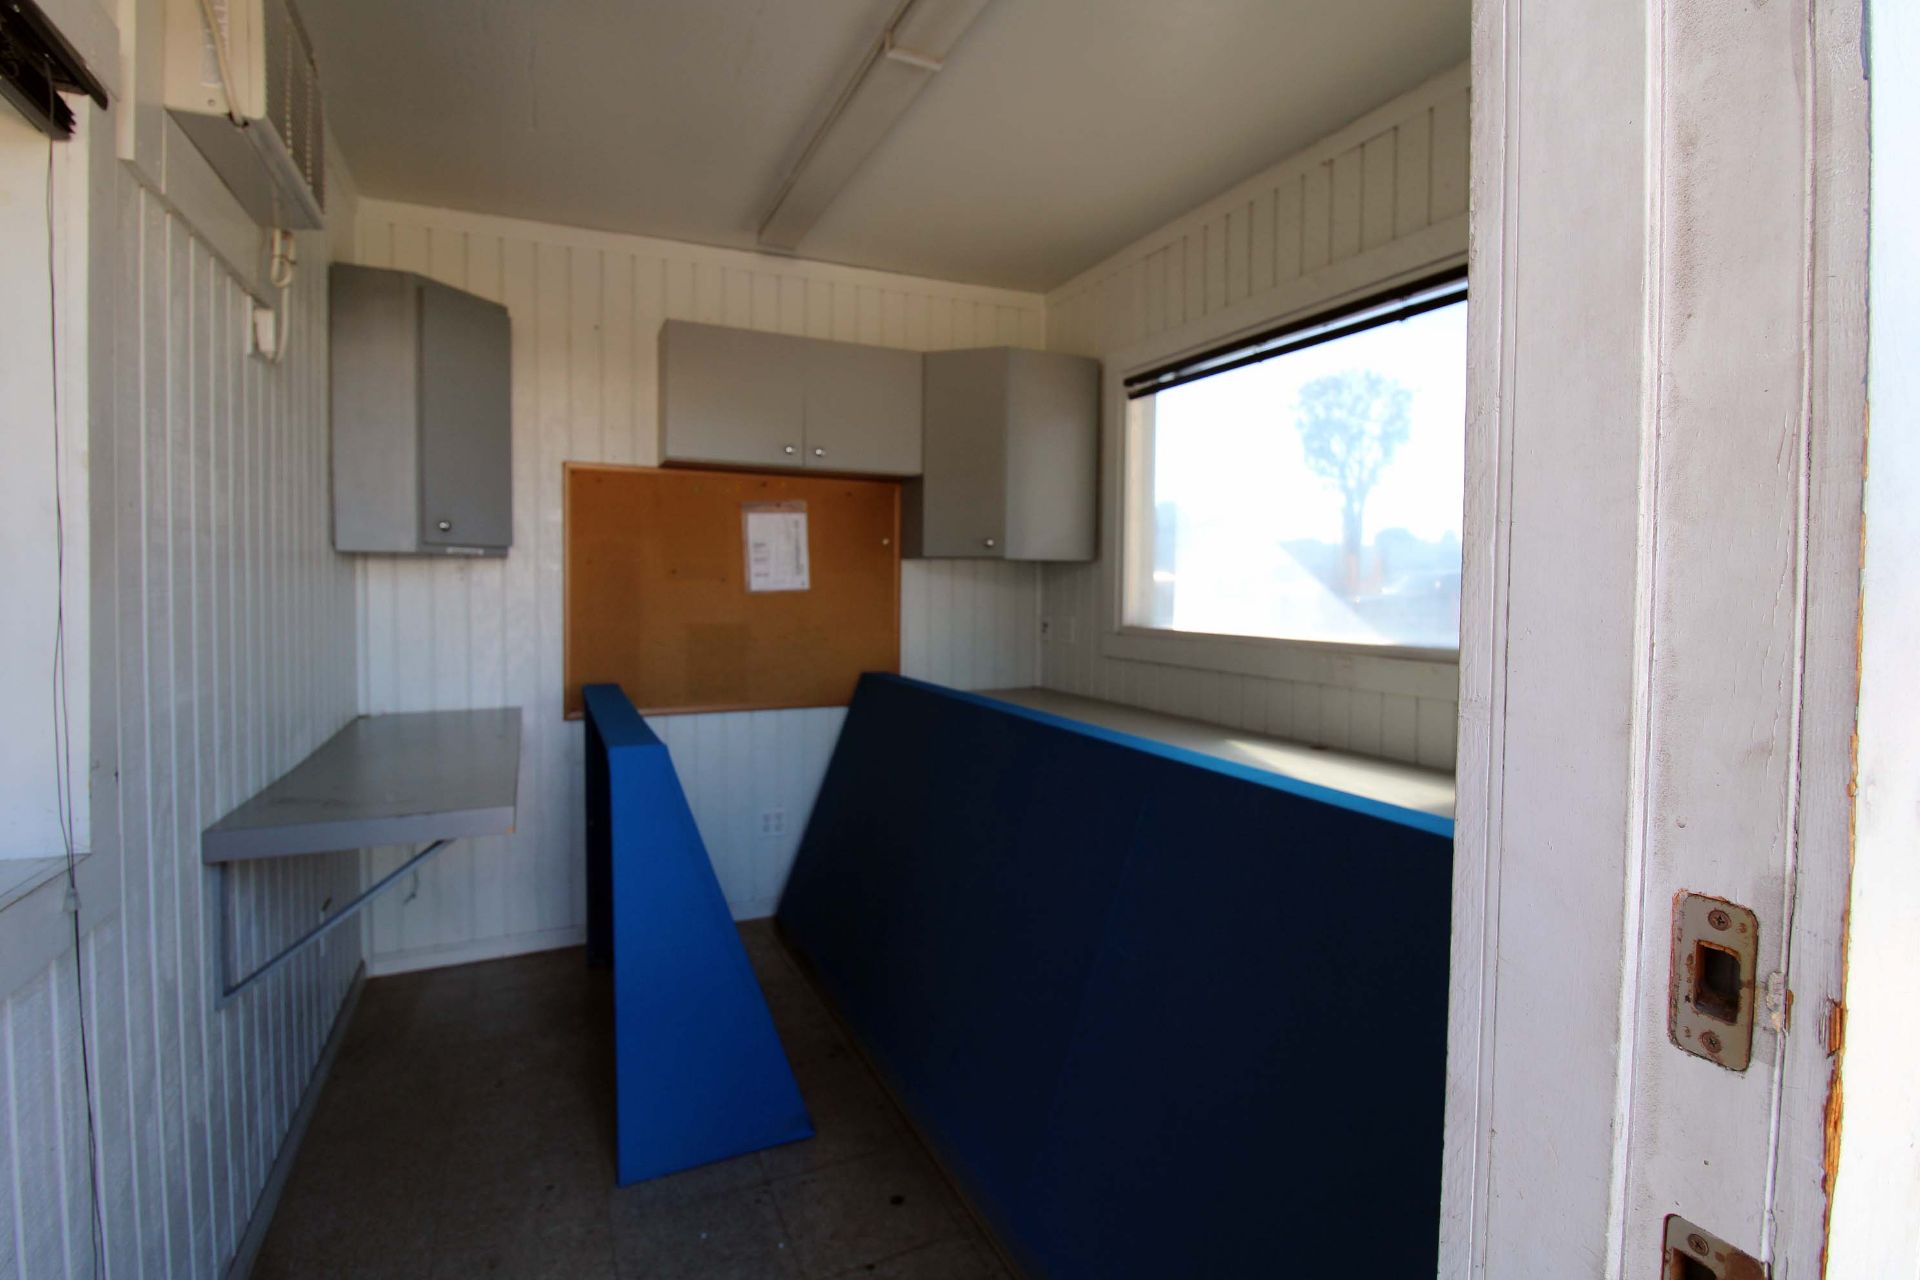 PORTABLE OUTDOOR BUILDING, 8' X 6' INTERIOR DIMS., insulated panel walls, multiple windows, entry - Image 3 of 5